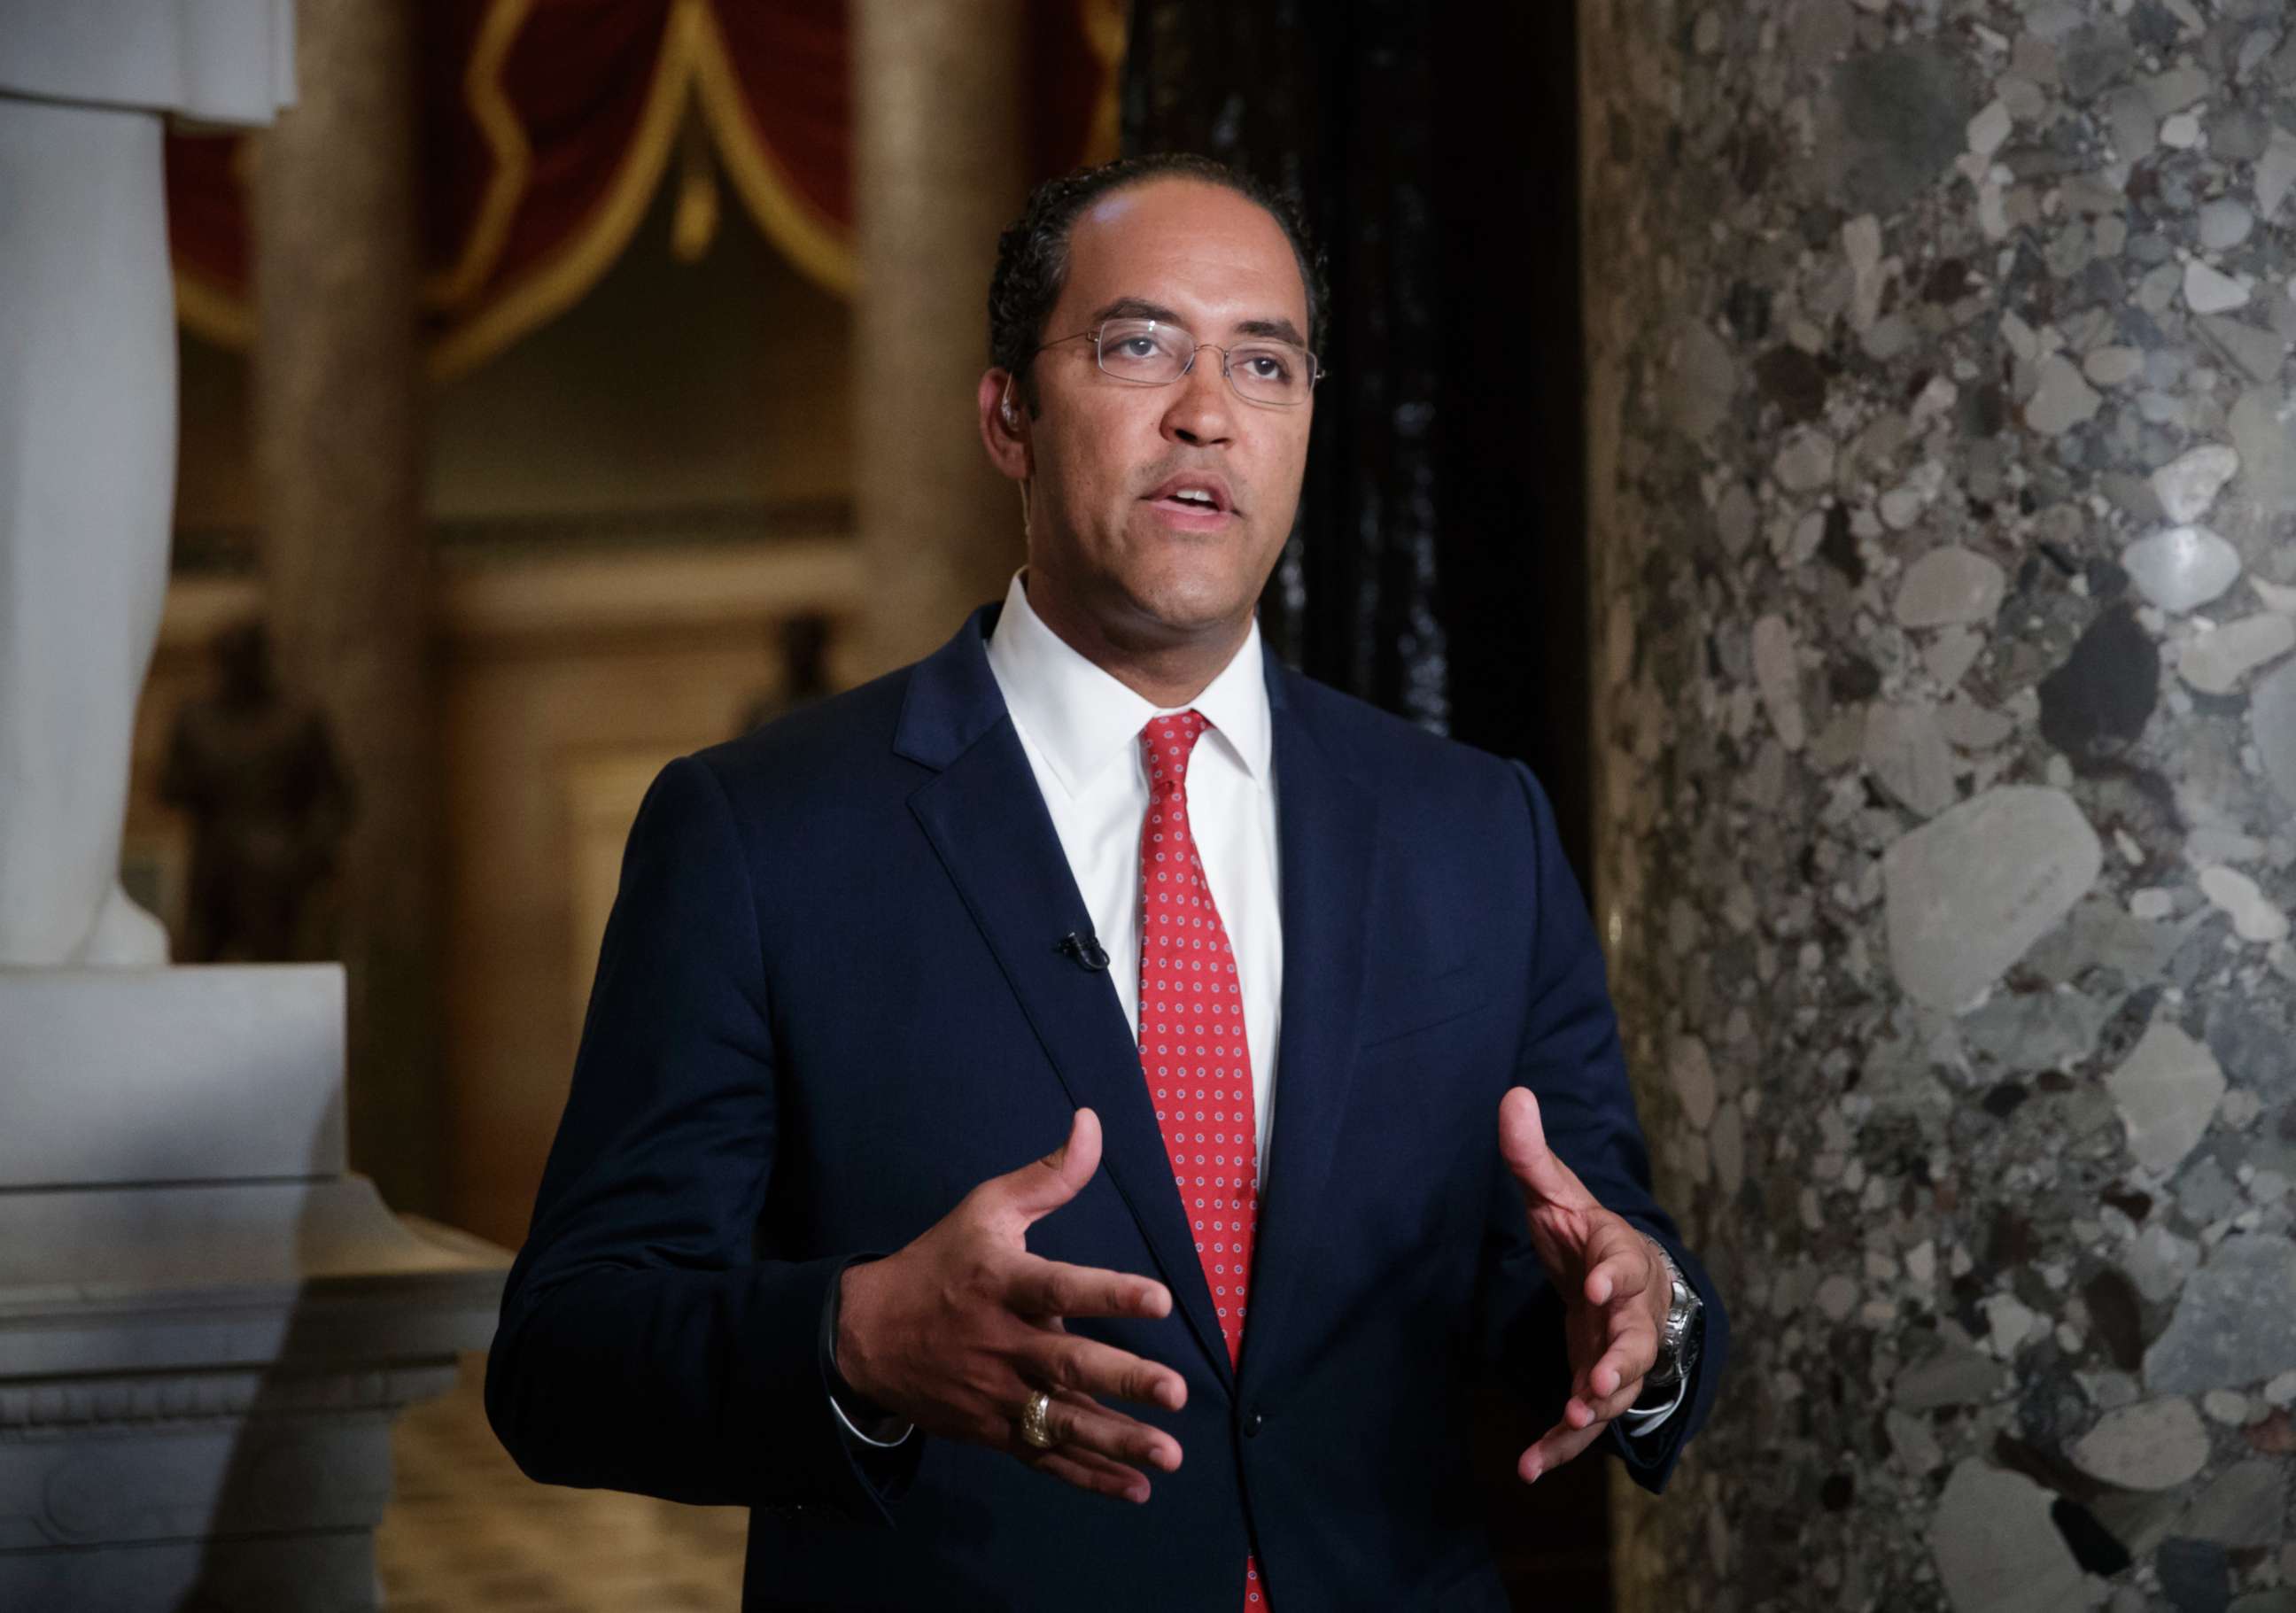 PHOTO: During a TV news interview, Rep. Will Hurd answers questions about immigration, border security and time running out to rewrite a trade pact with Canada and Mexico, on Capitol Hill in Washington, May 18, 2018.